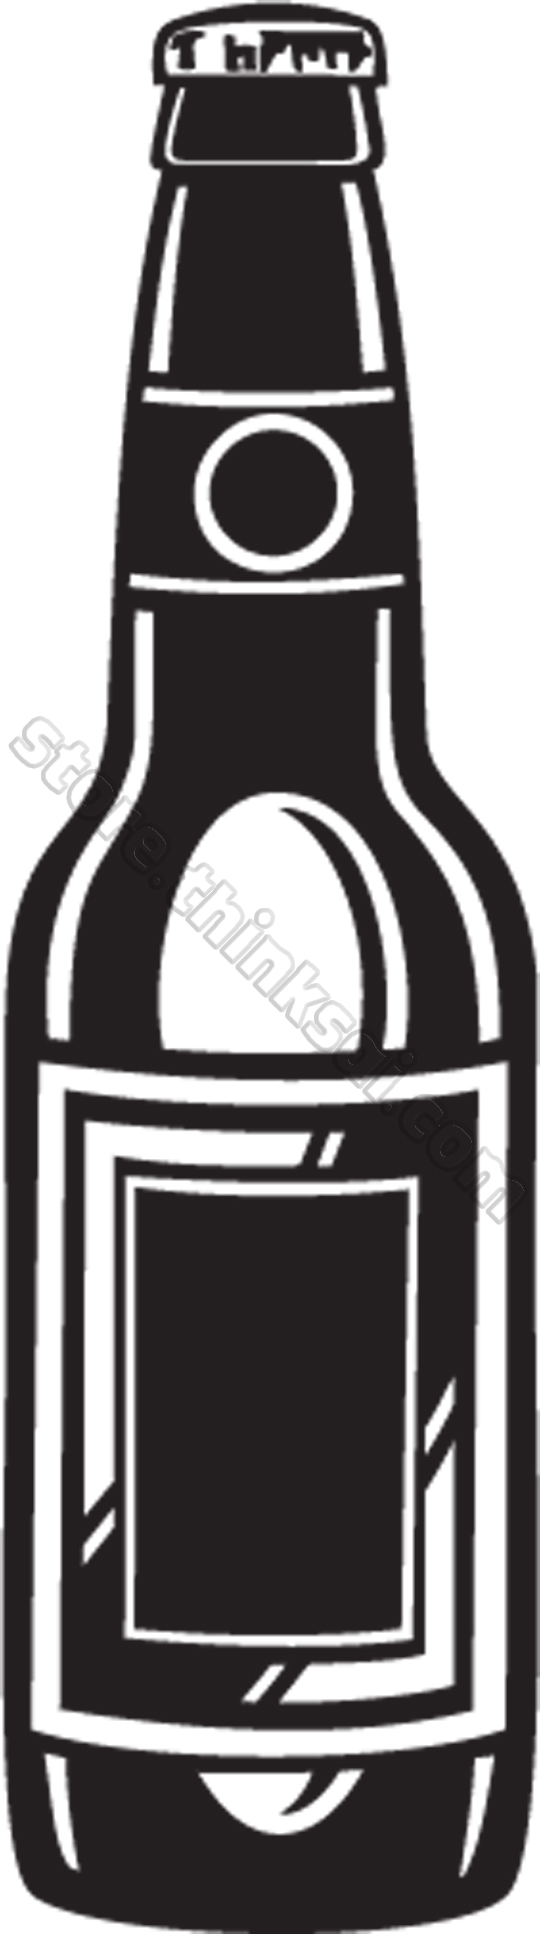 clipart beer labels - photo #33